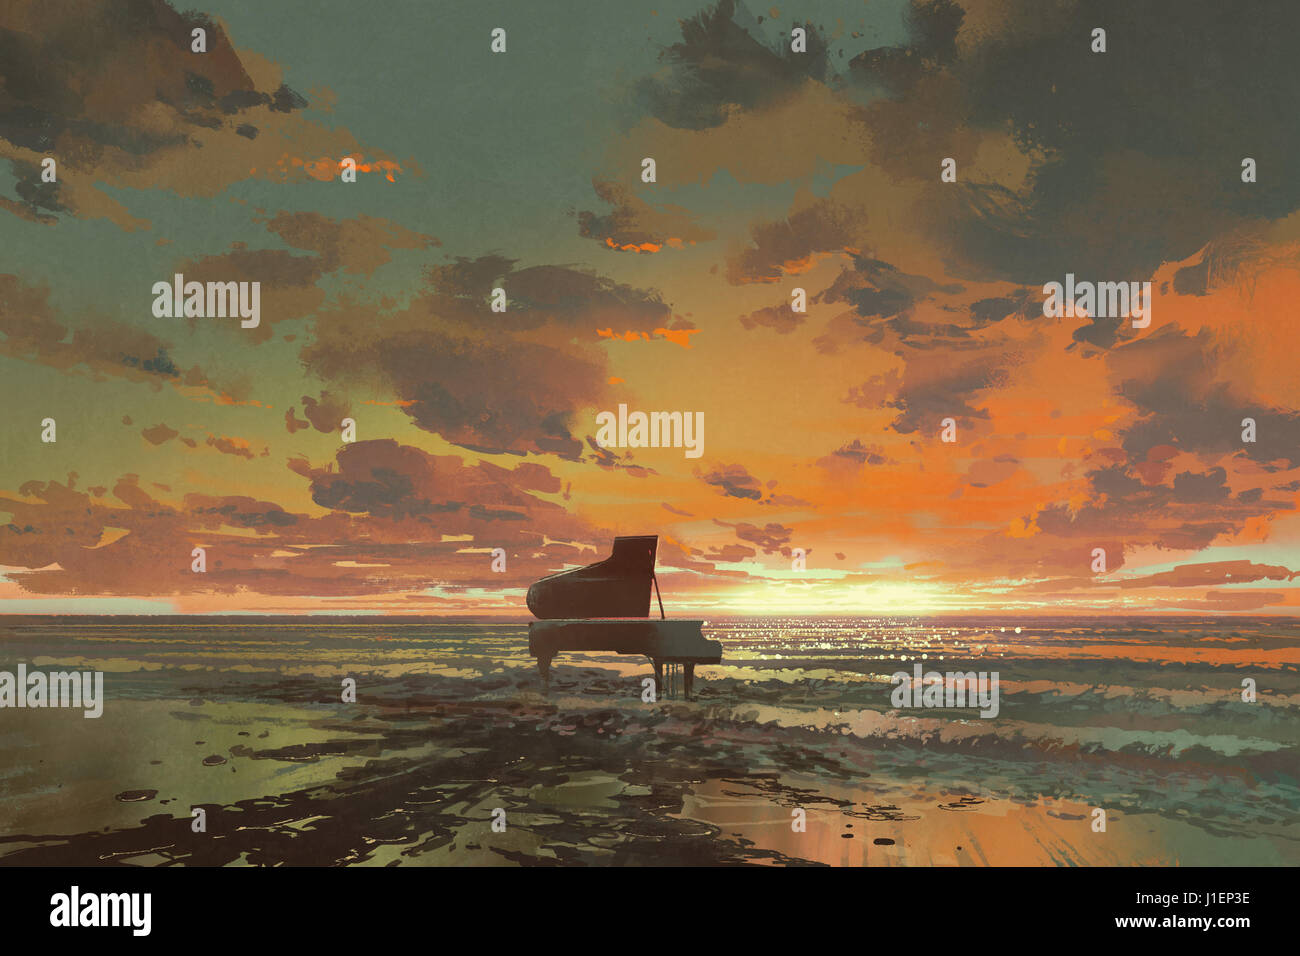 surreal painting of melting black piano on the beach at sunset, illustration art Stock Photo